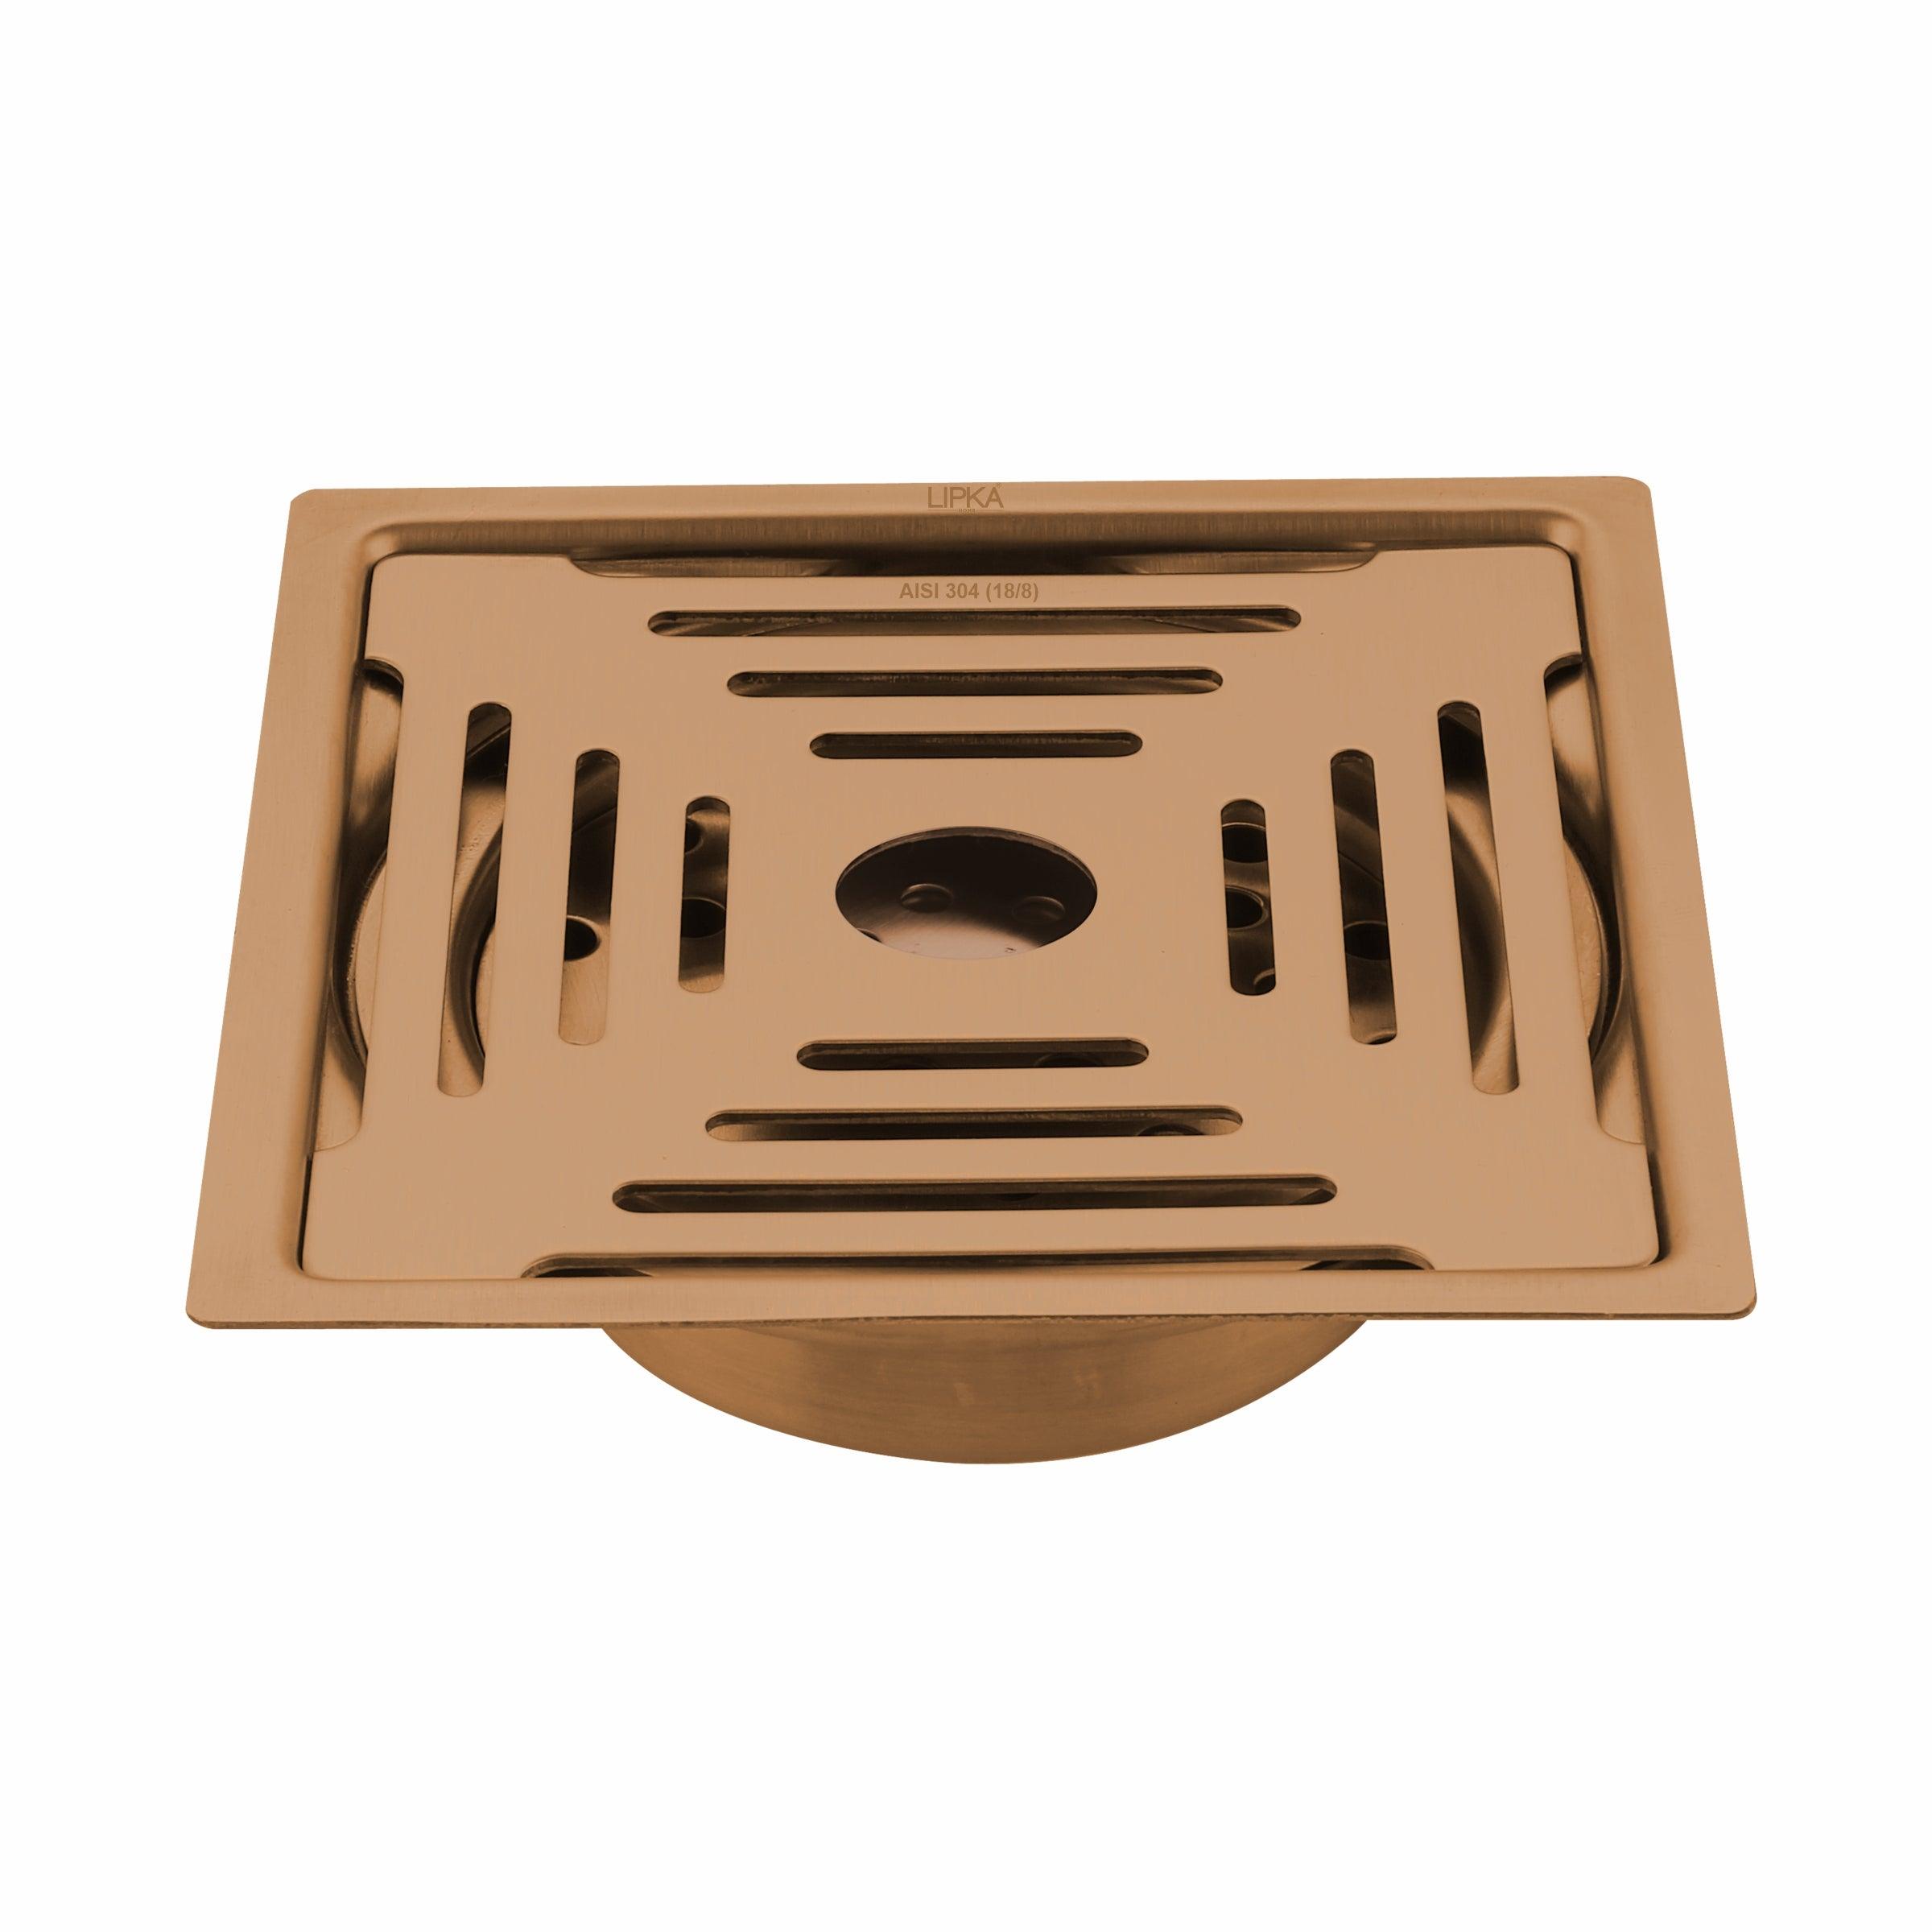 Green Exclusive Square Flat Cut Floor Drain in Antique Copper PVD Coating (6 x 6 Inches) with Hole & Cockroach Trap